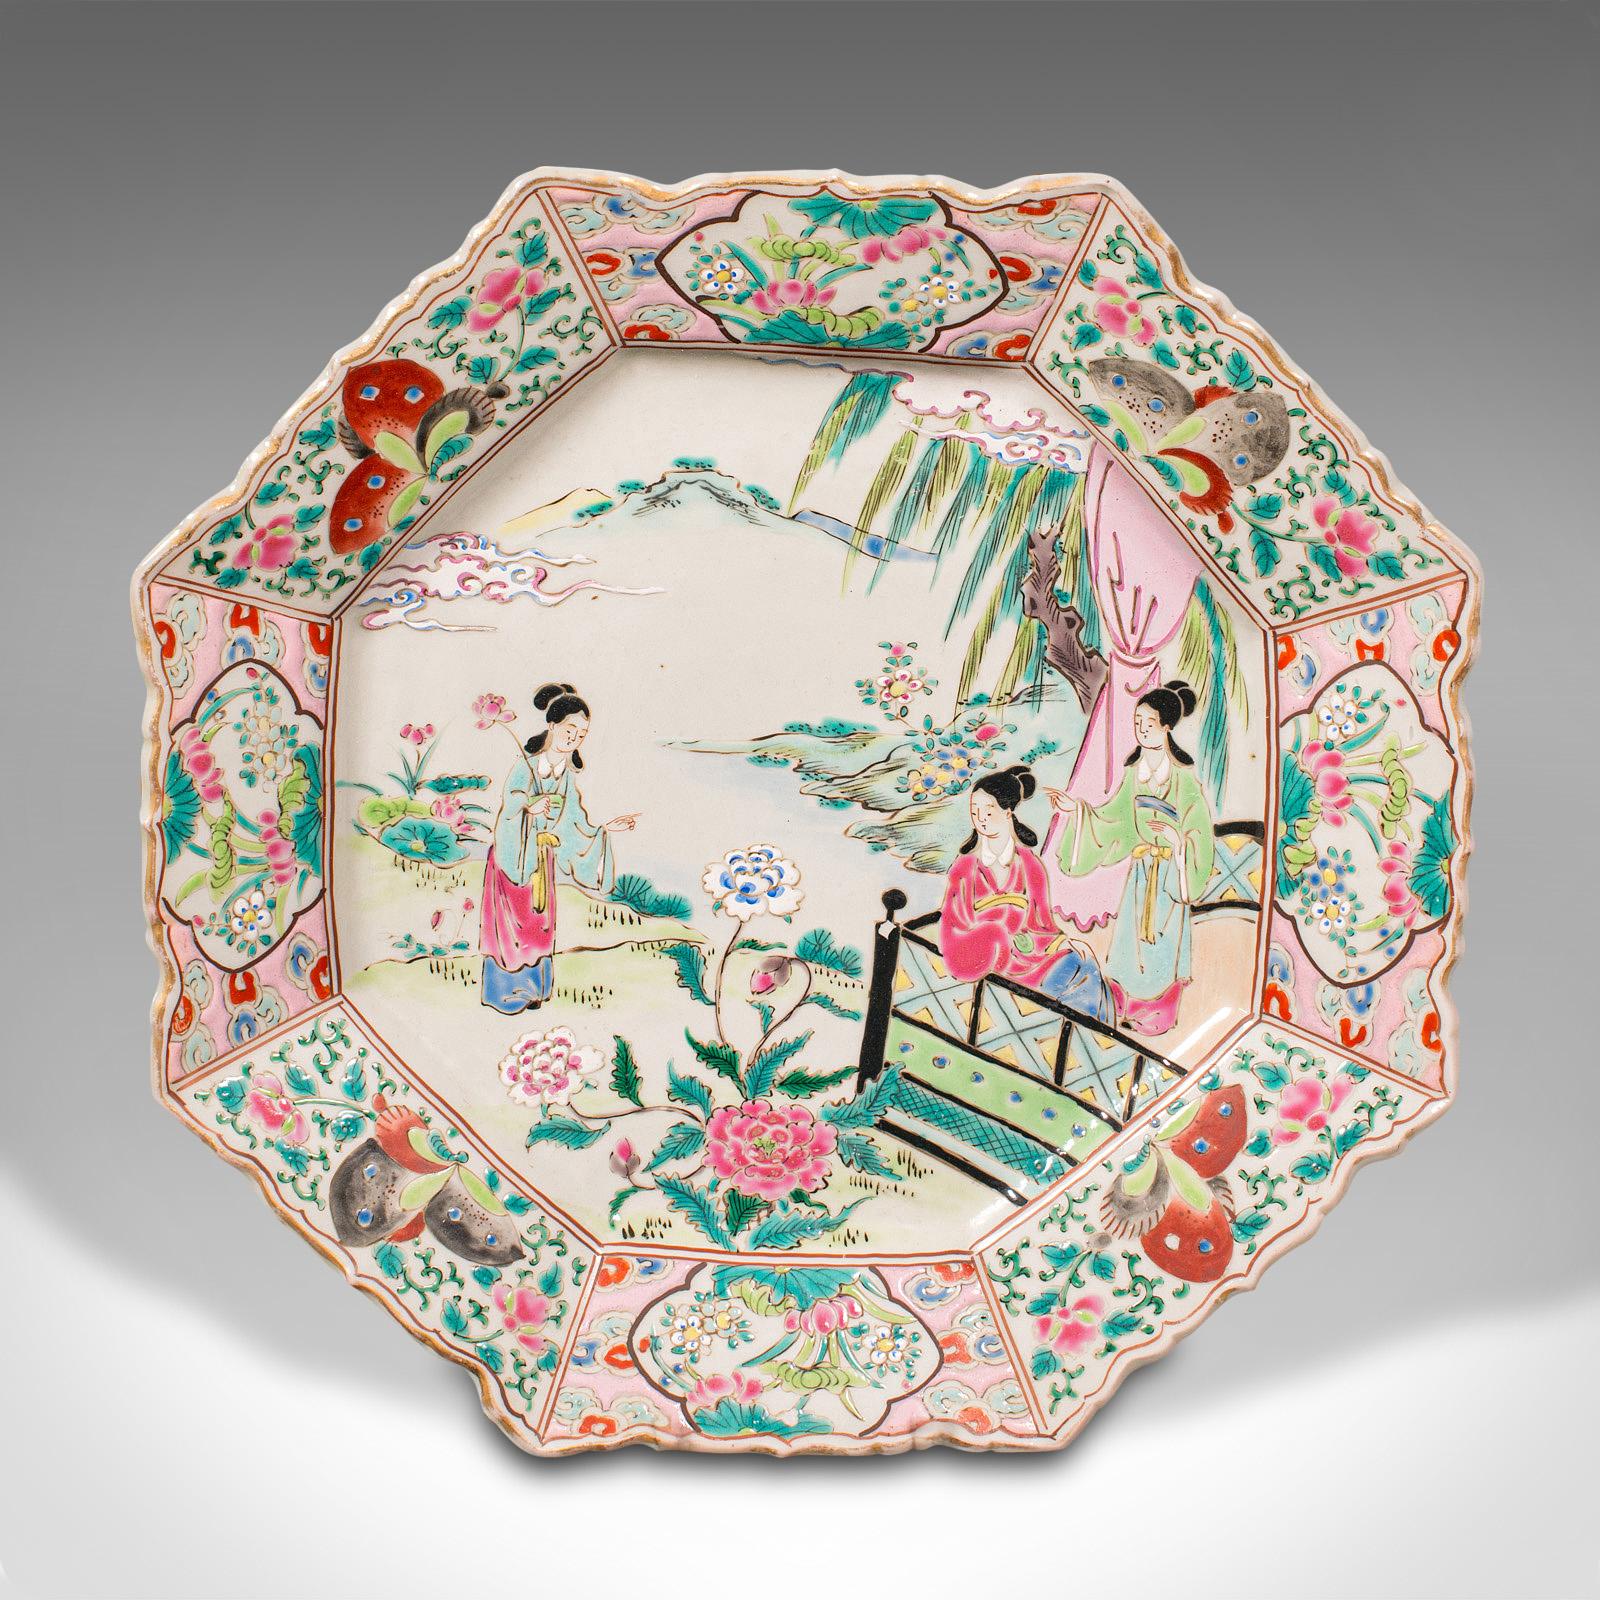 This is an antique decorative serving plate. A Japanese, ceramic octagonal charger in Meiji taste, dating to the late Victorian period, circa 1900.

Superb decorative appeal with traditional Japanese artistry
Displaying a desirable aged patina and